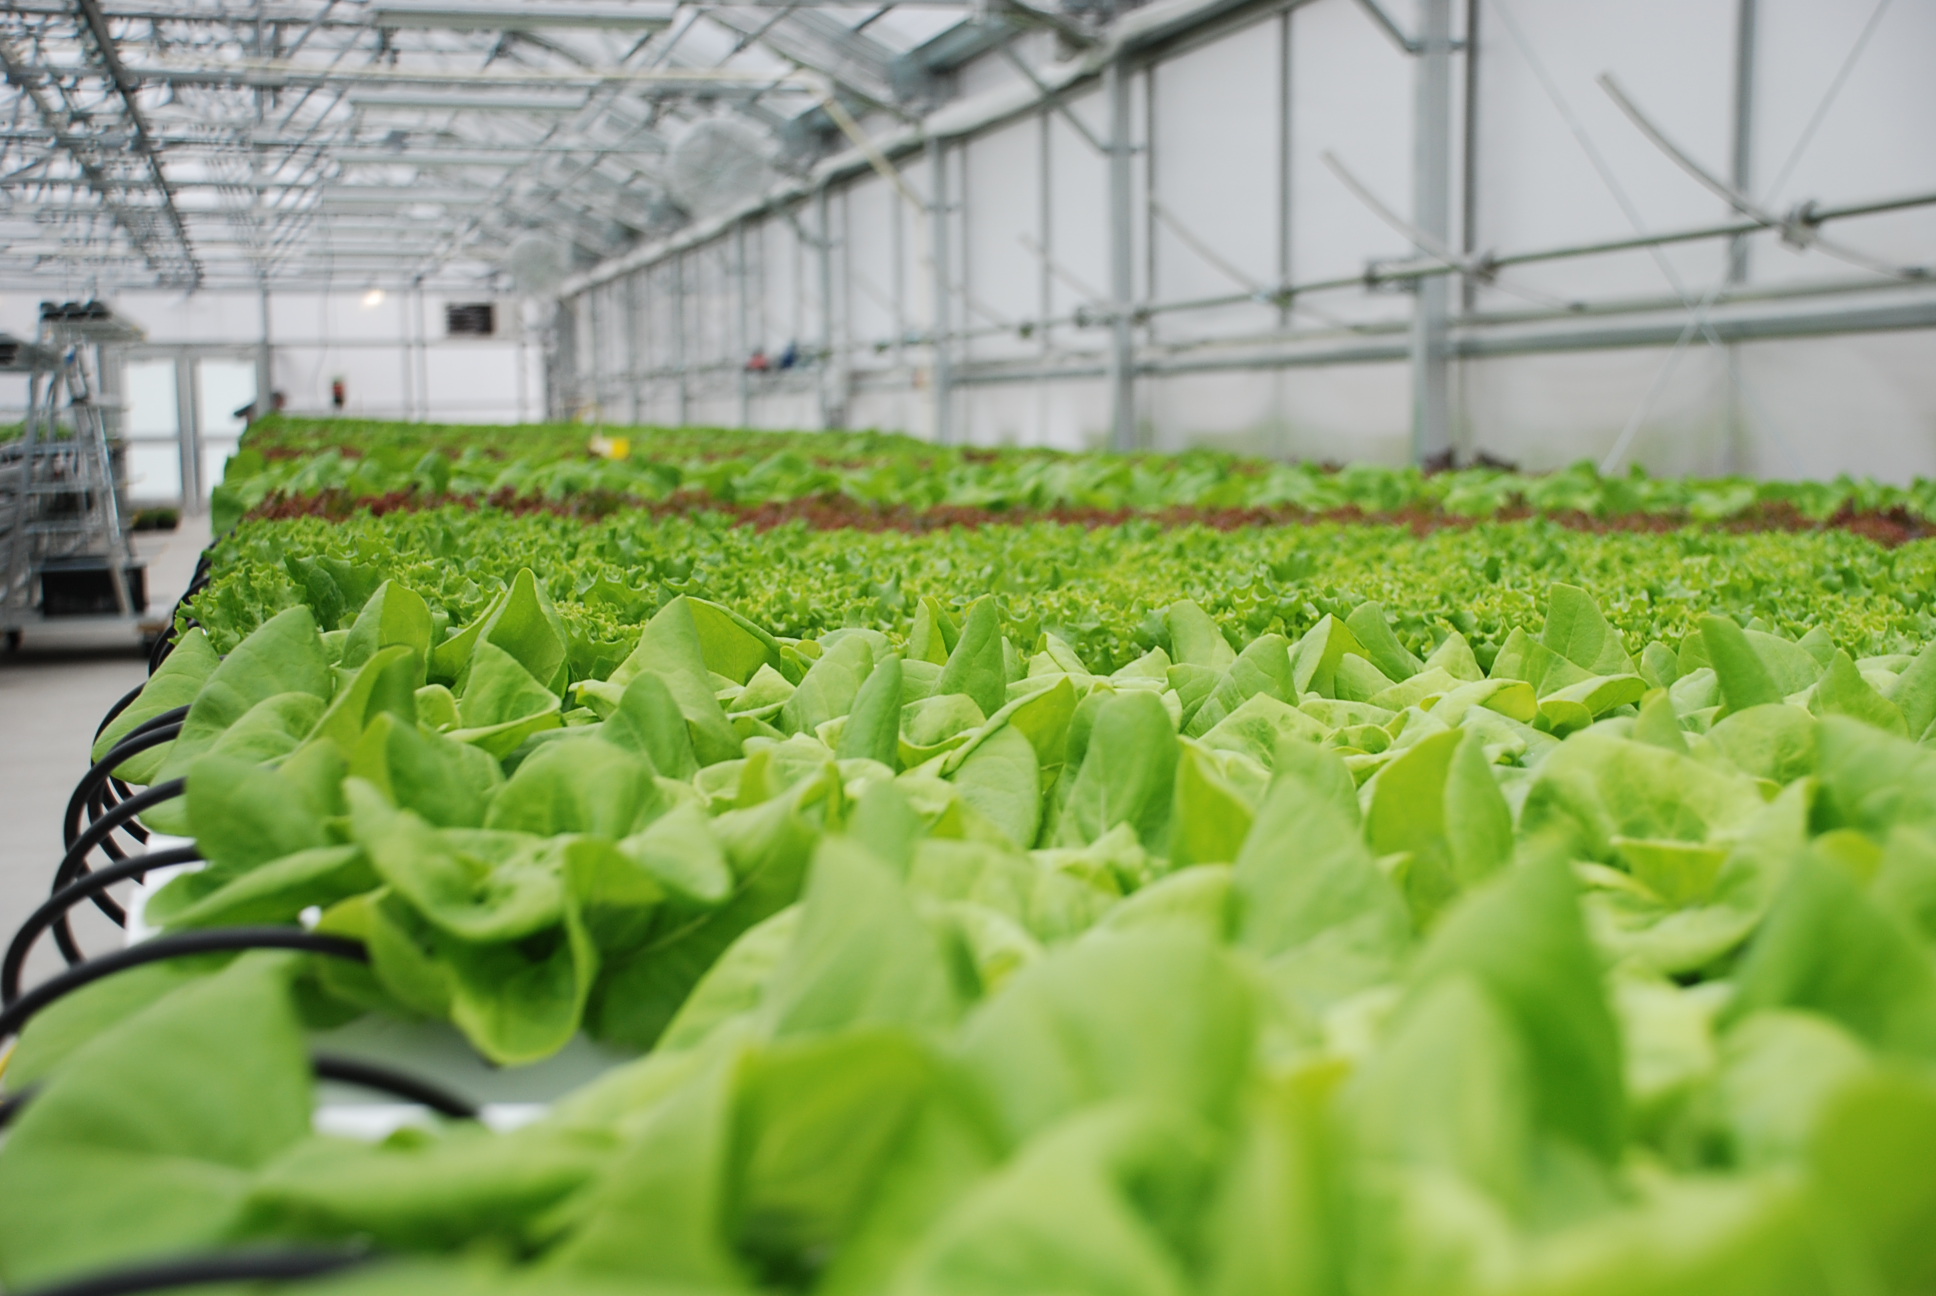 Cost and Profitability of Hydroponic Farming